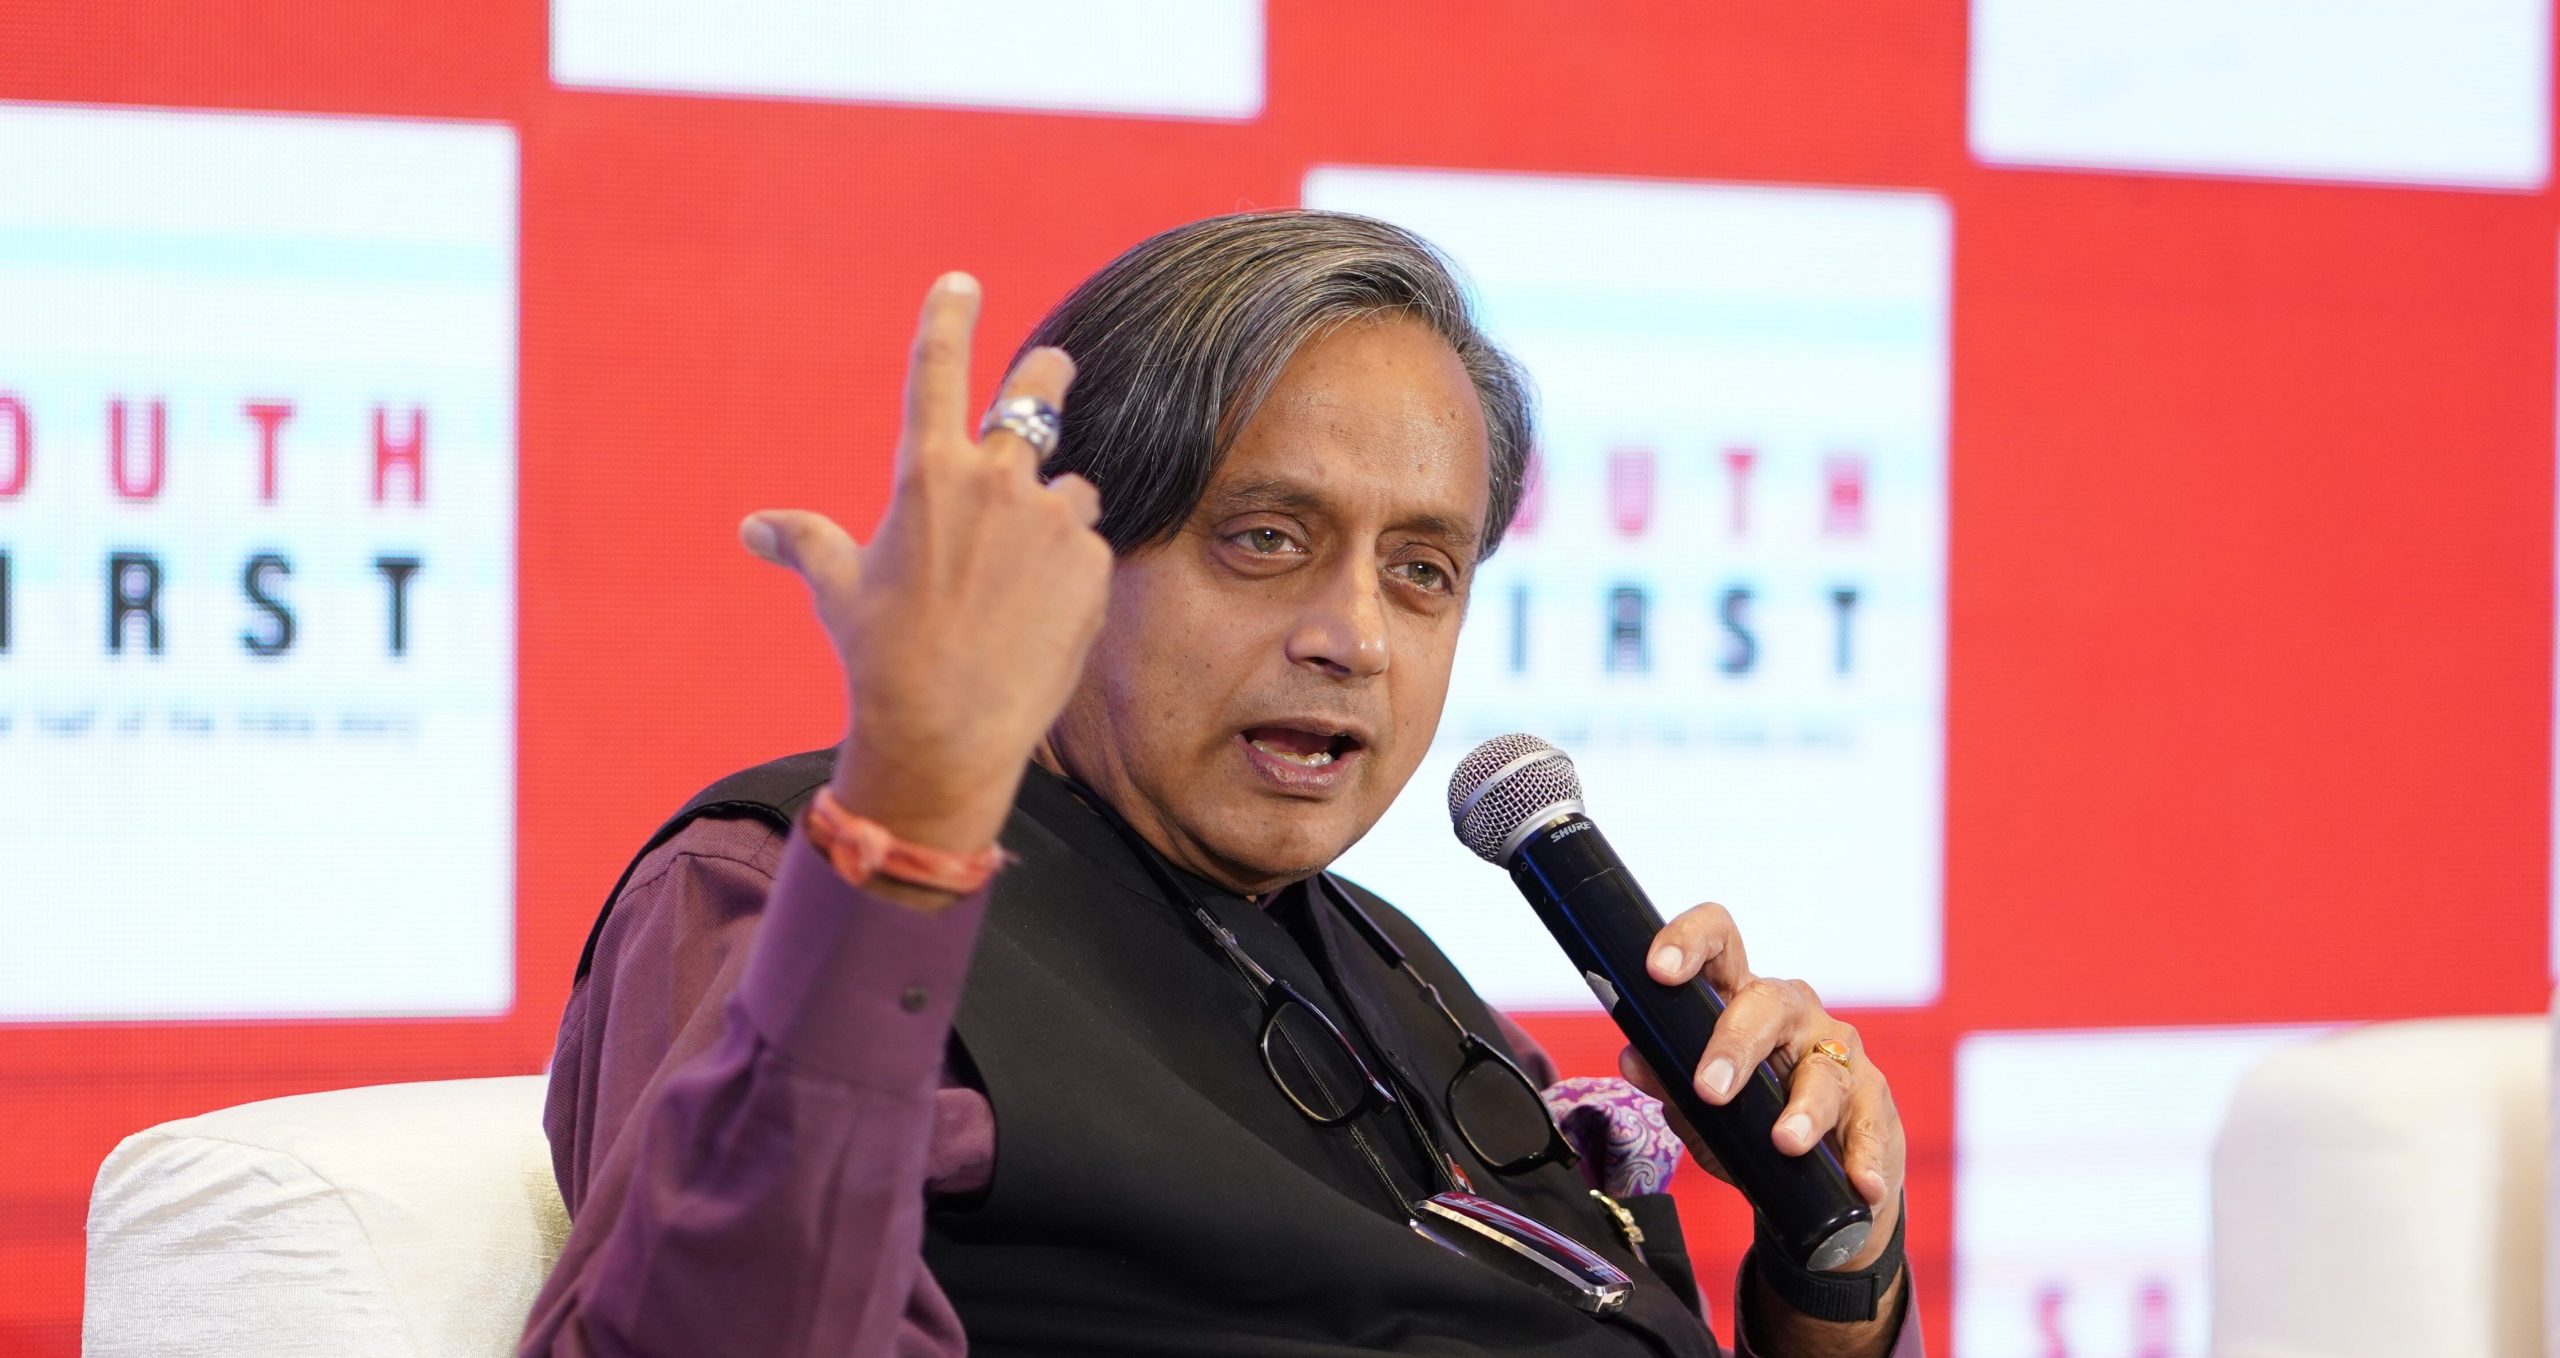 Practice of South subsidising North has been going on for a long time: Shashi Tharoor